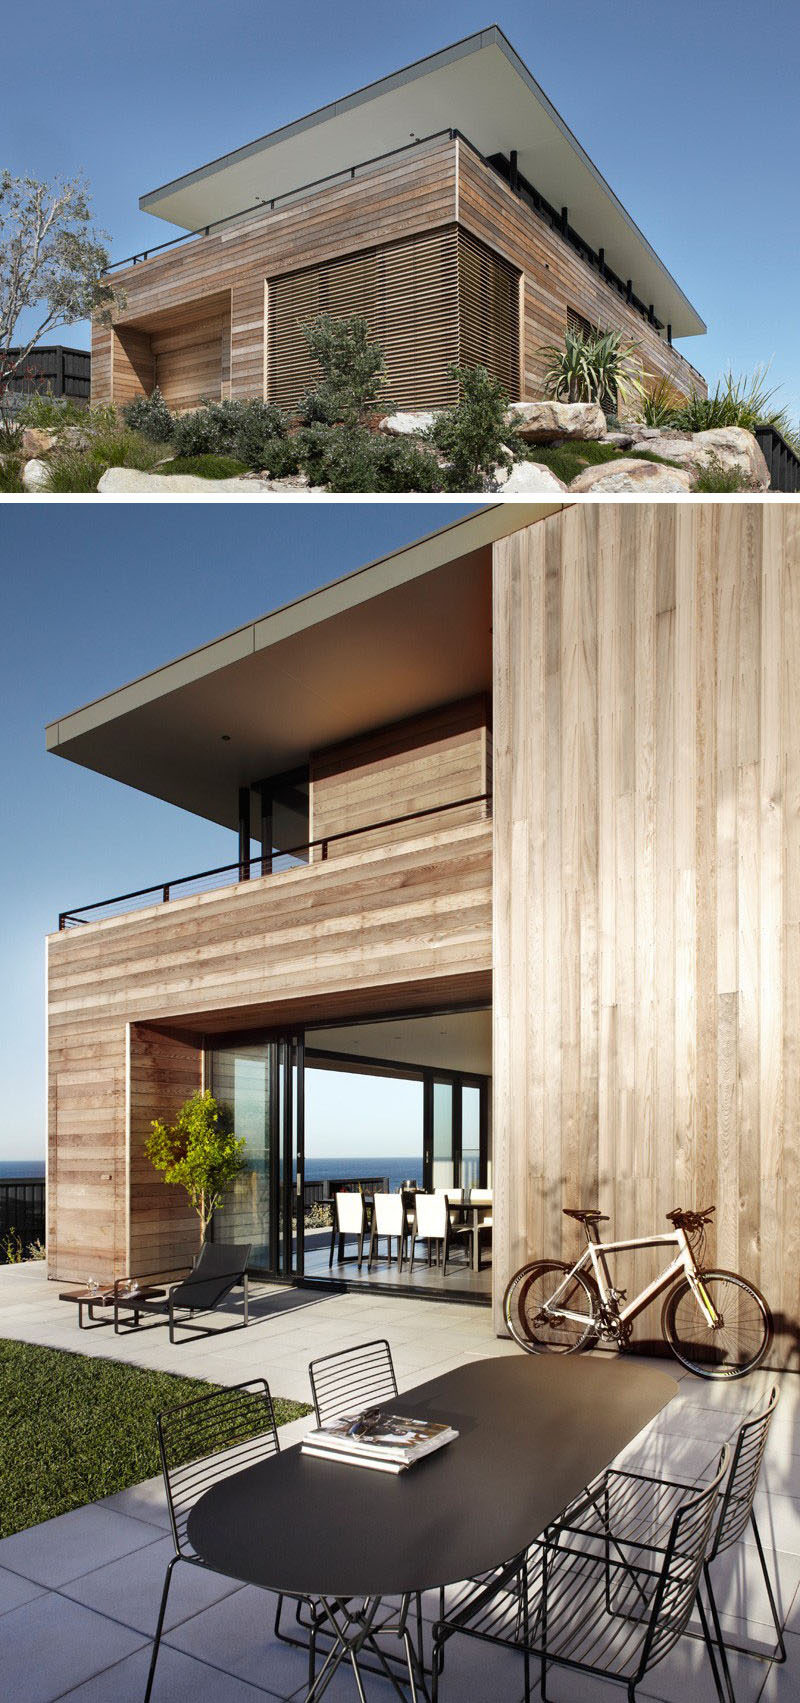 14 Examples Of Modern Beach Houses // Light wood paneling covers the exterior of the Australian beach house that opens up wide to show off the incredible views of the beach.